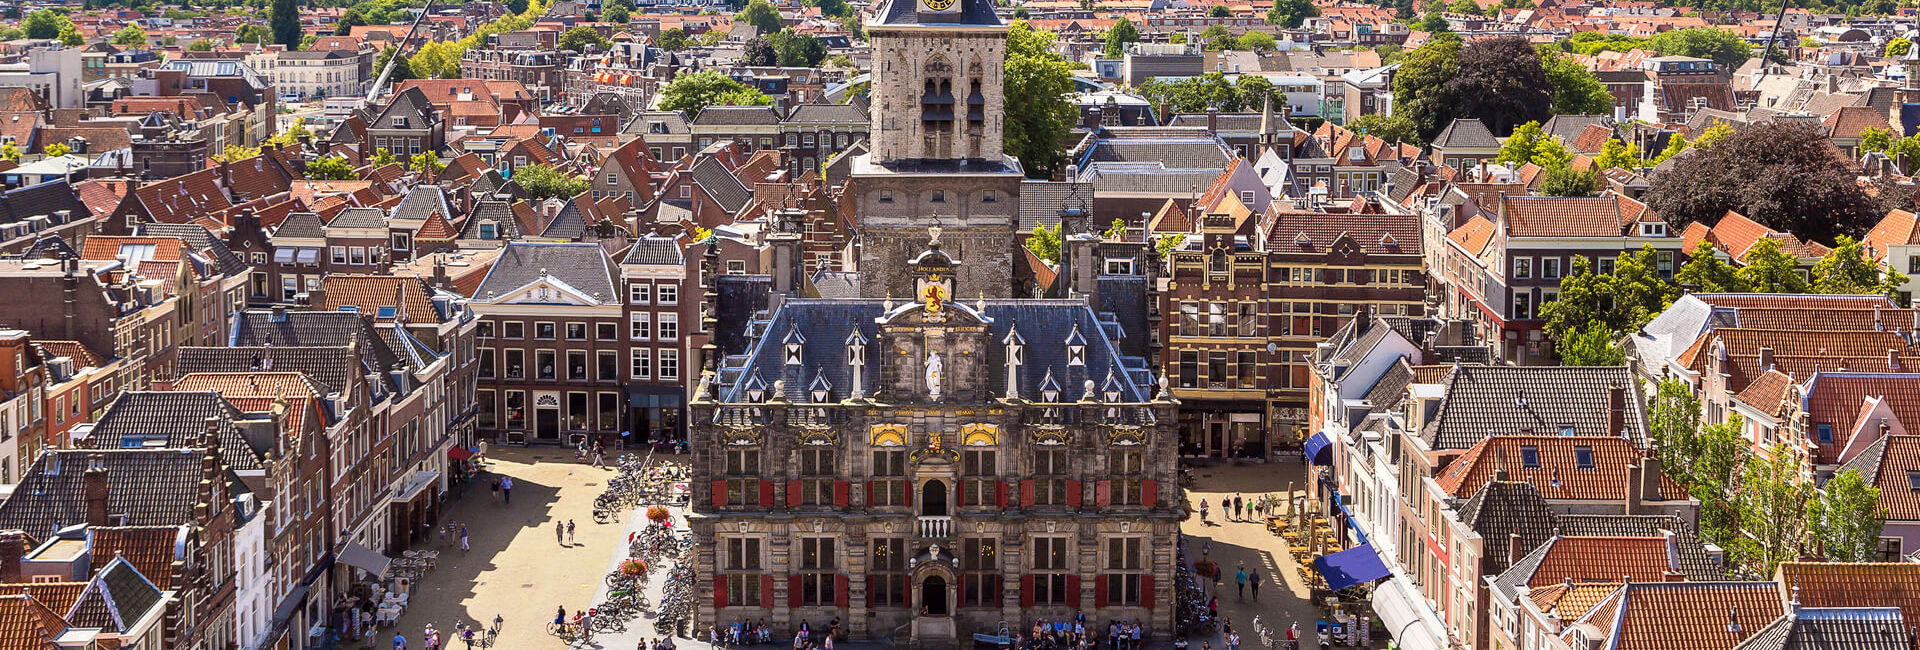 Town Hall from the tower of The New Church - Explore Delft Gasterij 't Karrewiel